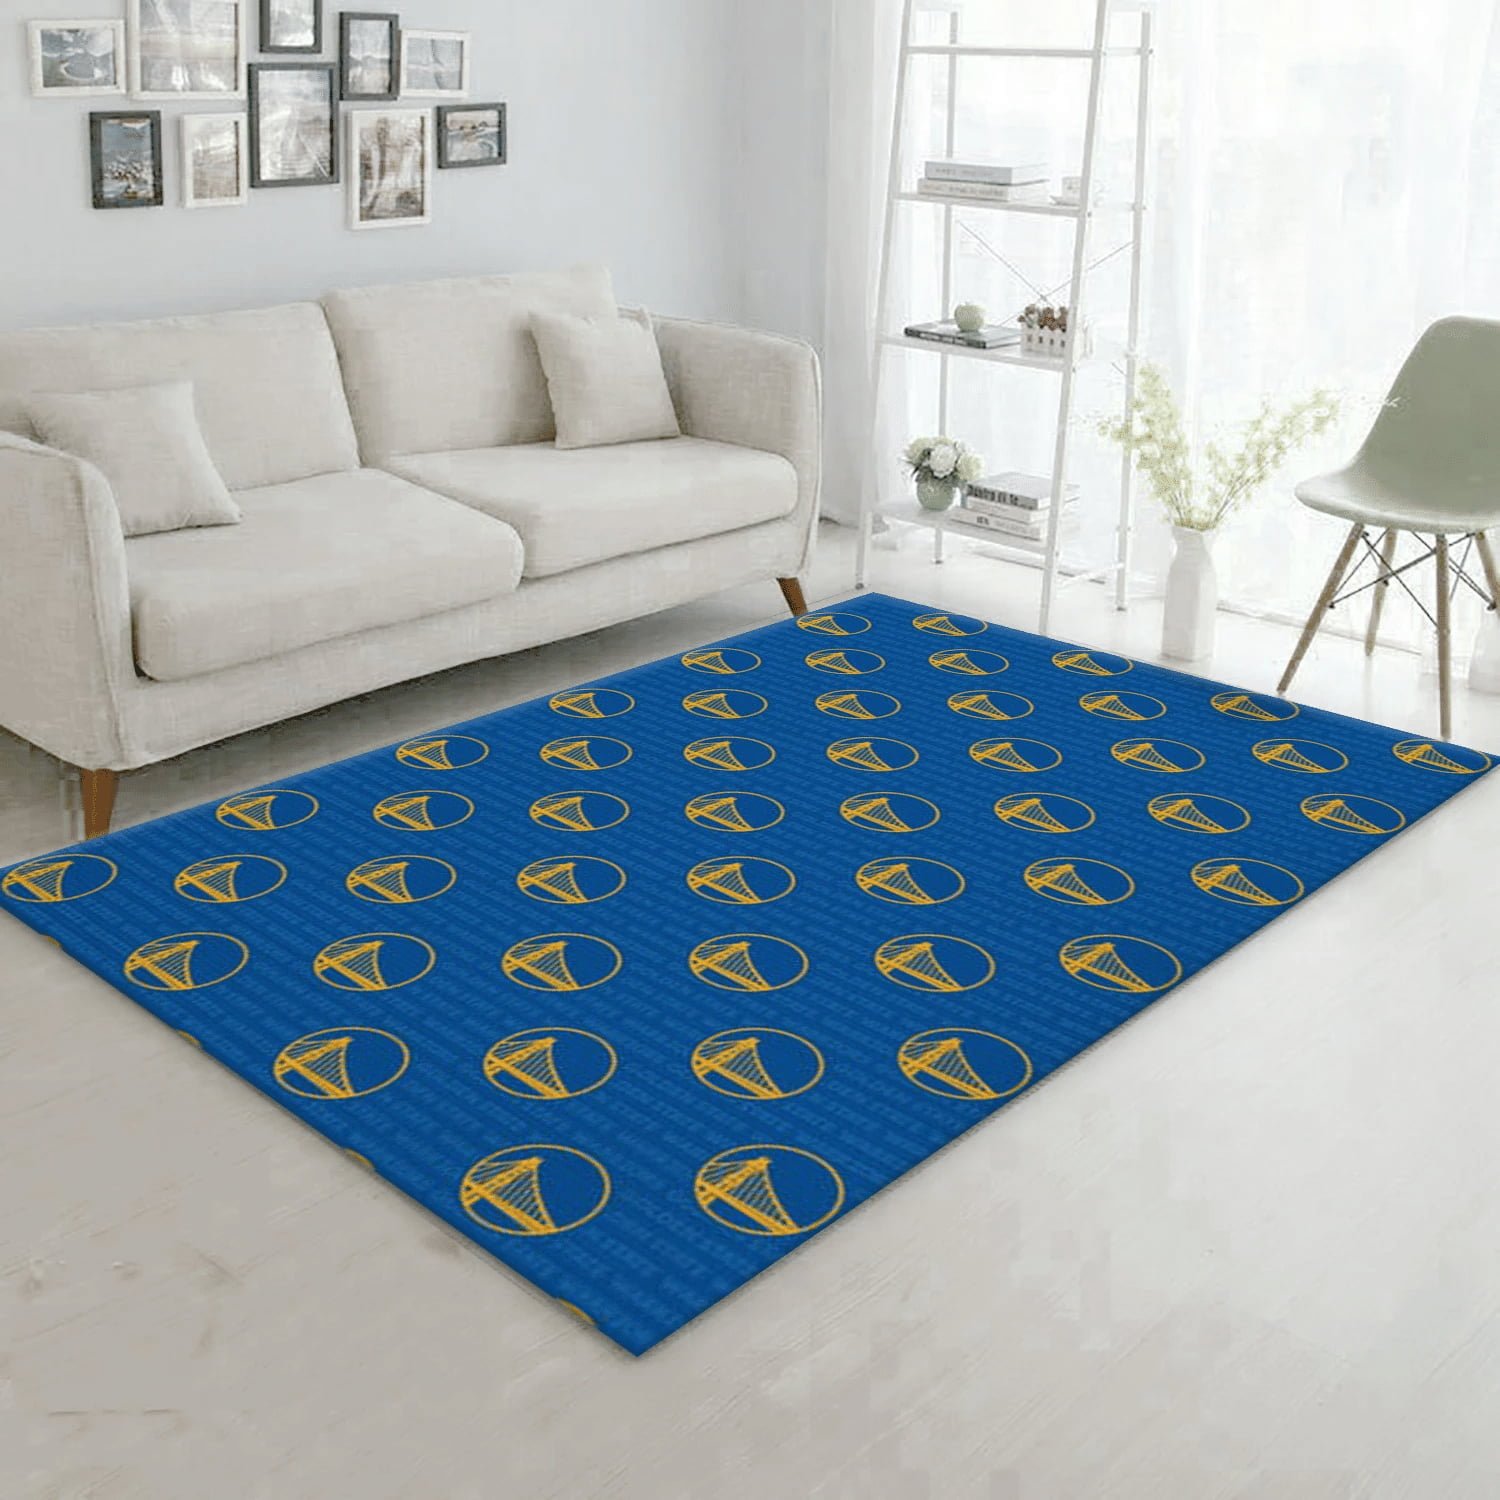 Golden State Warriors Patterns NBA Area Rug For Christmas